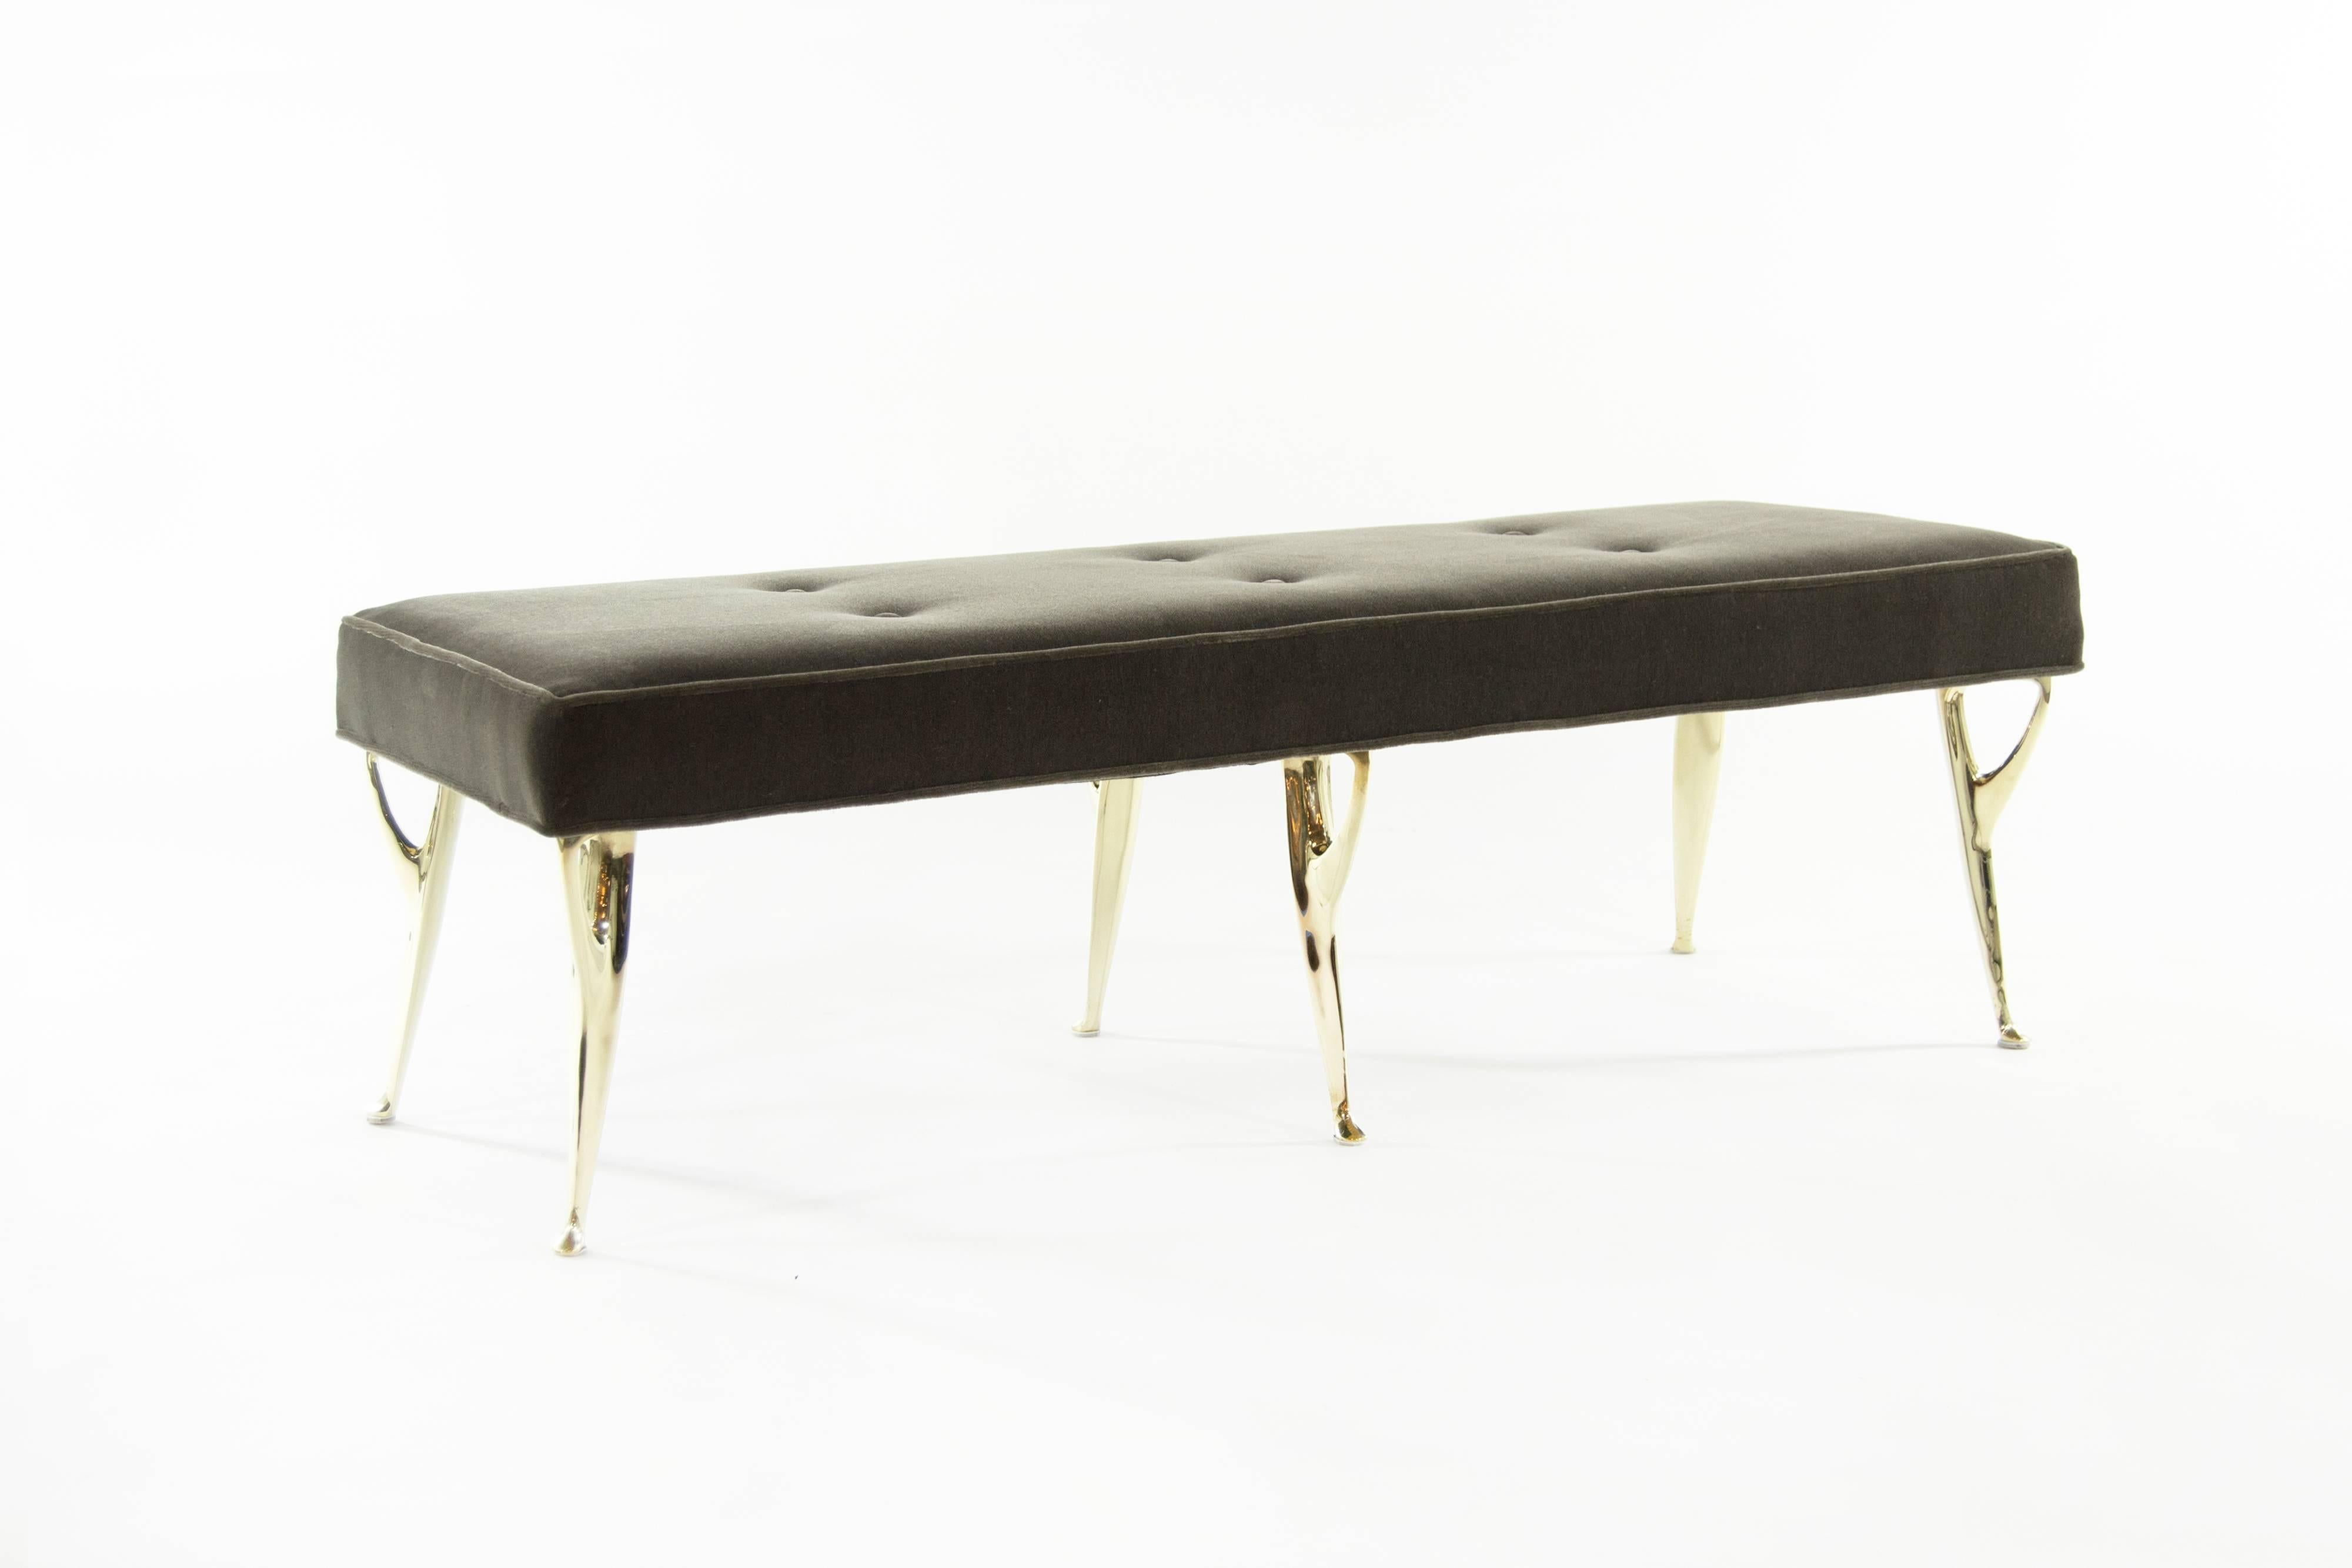 Italian bench featuring sculptural solid brass legs, newly upholstered in brown mohair.